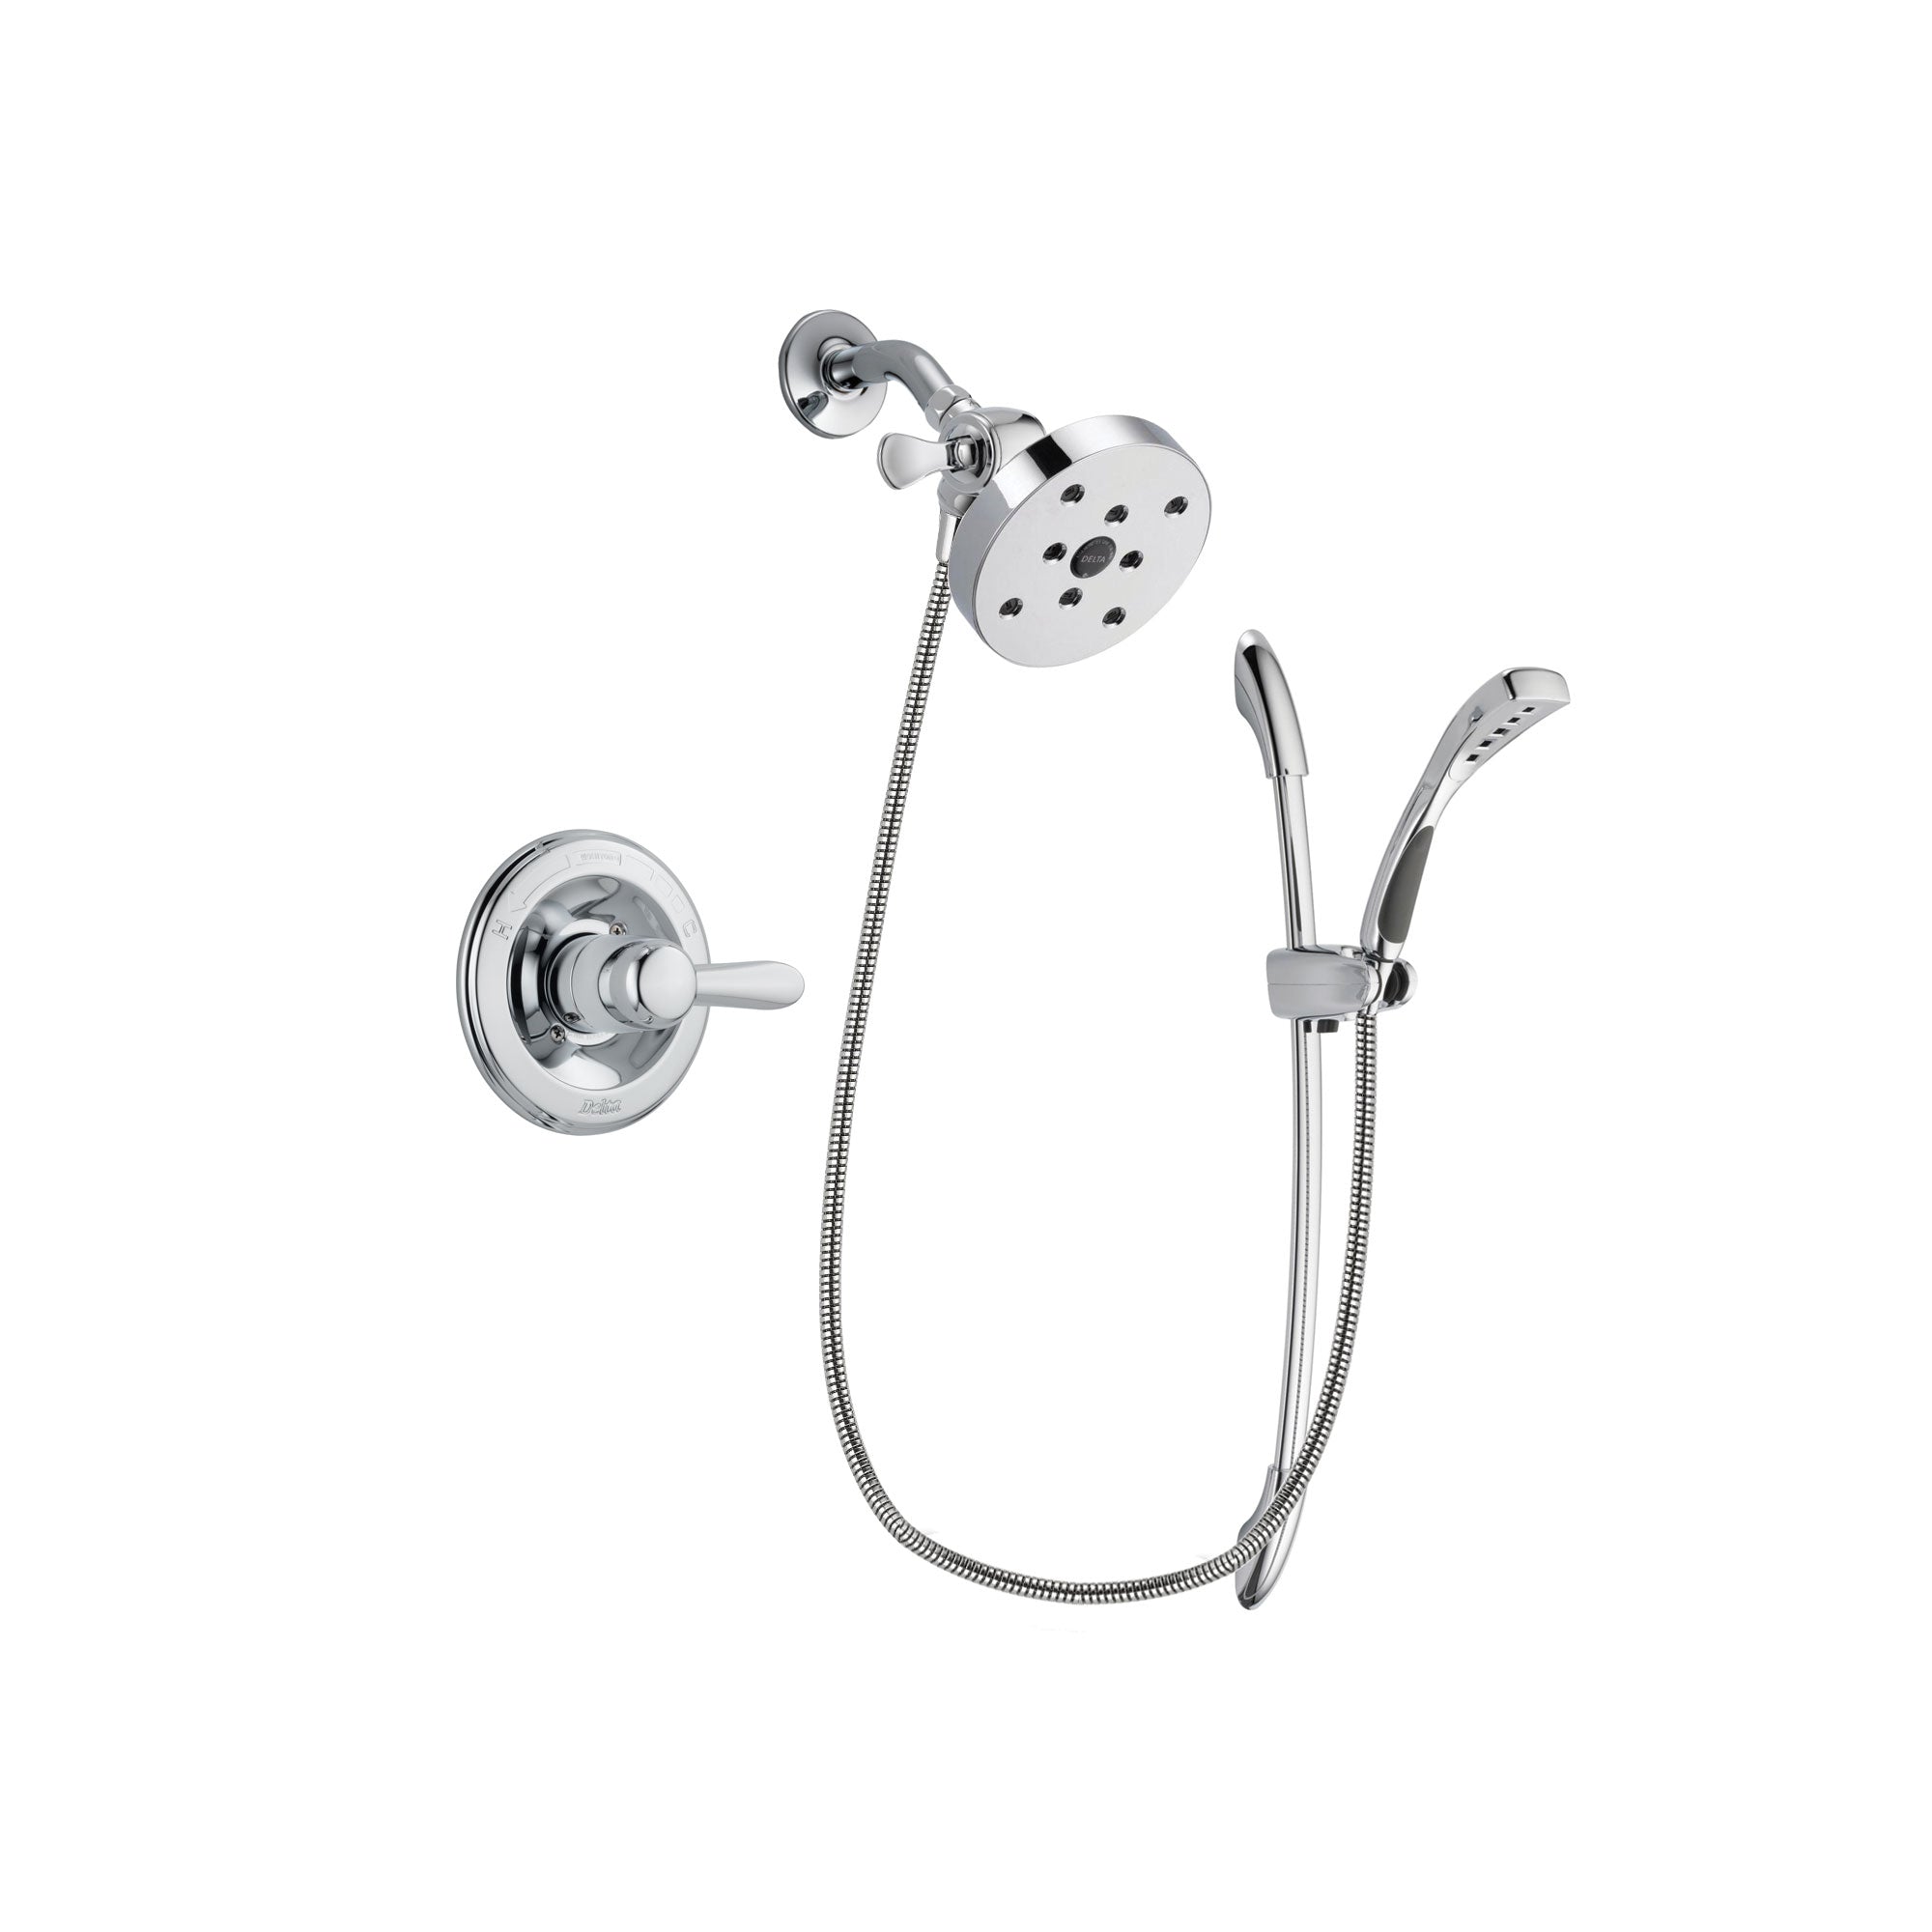 Delta Lahara Chrome Finish Shower Faucet System Package with 5-1/2 inch Shower Head and Handheld Shower with Slide Bar Includes Rough-in Valve DSP0538V